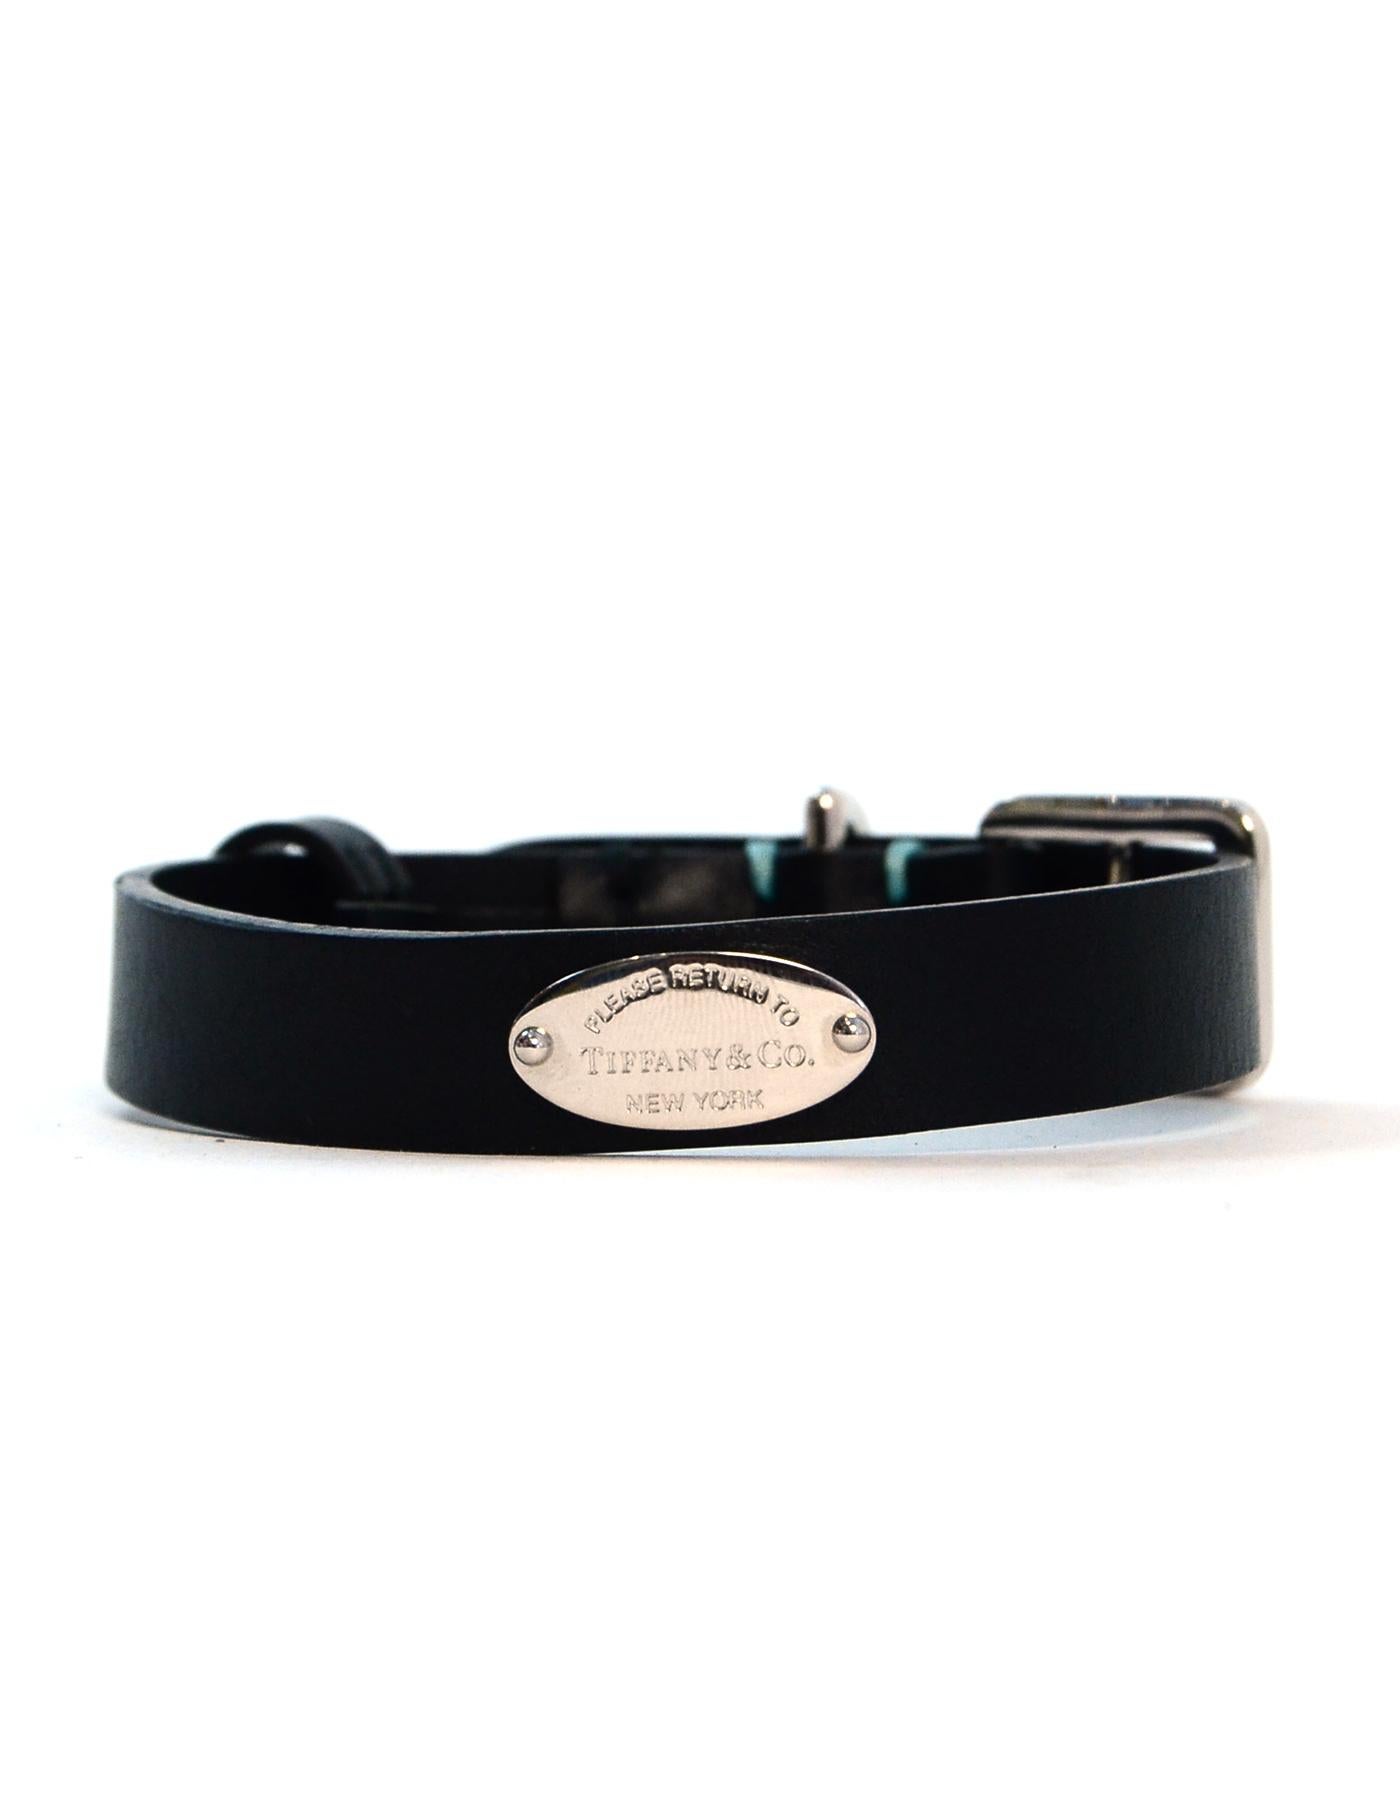 Tiffany & Co. Leather/Palladium Small Dog Collar 
Made In: Italy
Color: Black
Materials: Leather, palladium
Hallmarks: NY T&CO 1837
Closure/Opening: Front buclkle closure
Overall Condition: Excellent pre-owned condition
Estimated Retail: $235 +